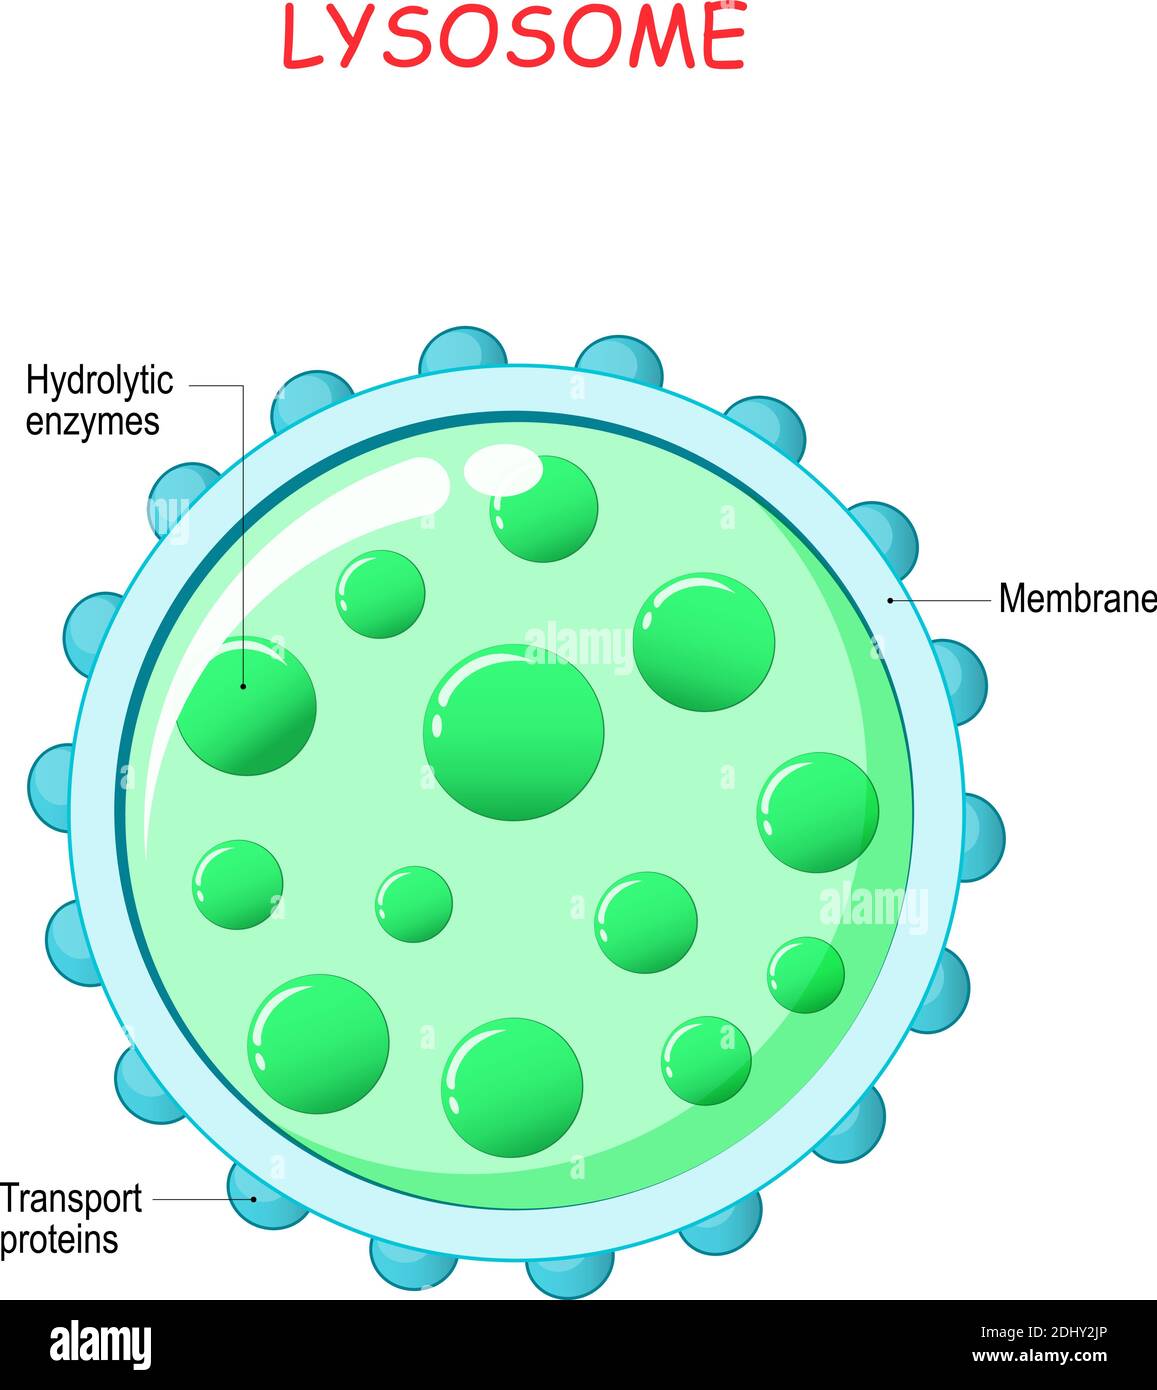 lysosome anatomy. Hydrolytic enzymes, Membrane and transport proteins. This organelle use the enzymes to break-down virus particles or bacteria Stock Vector